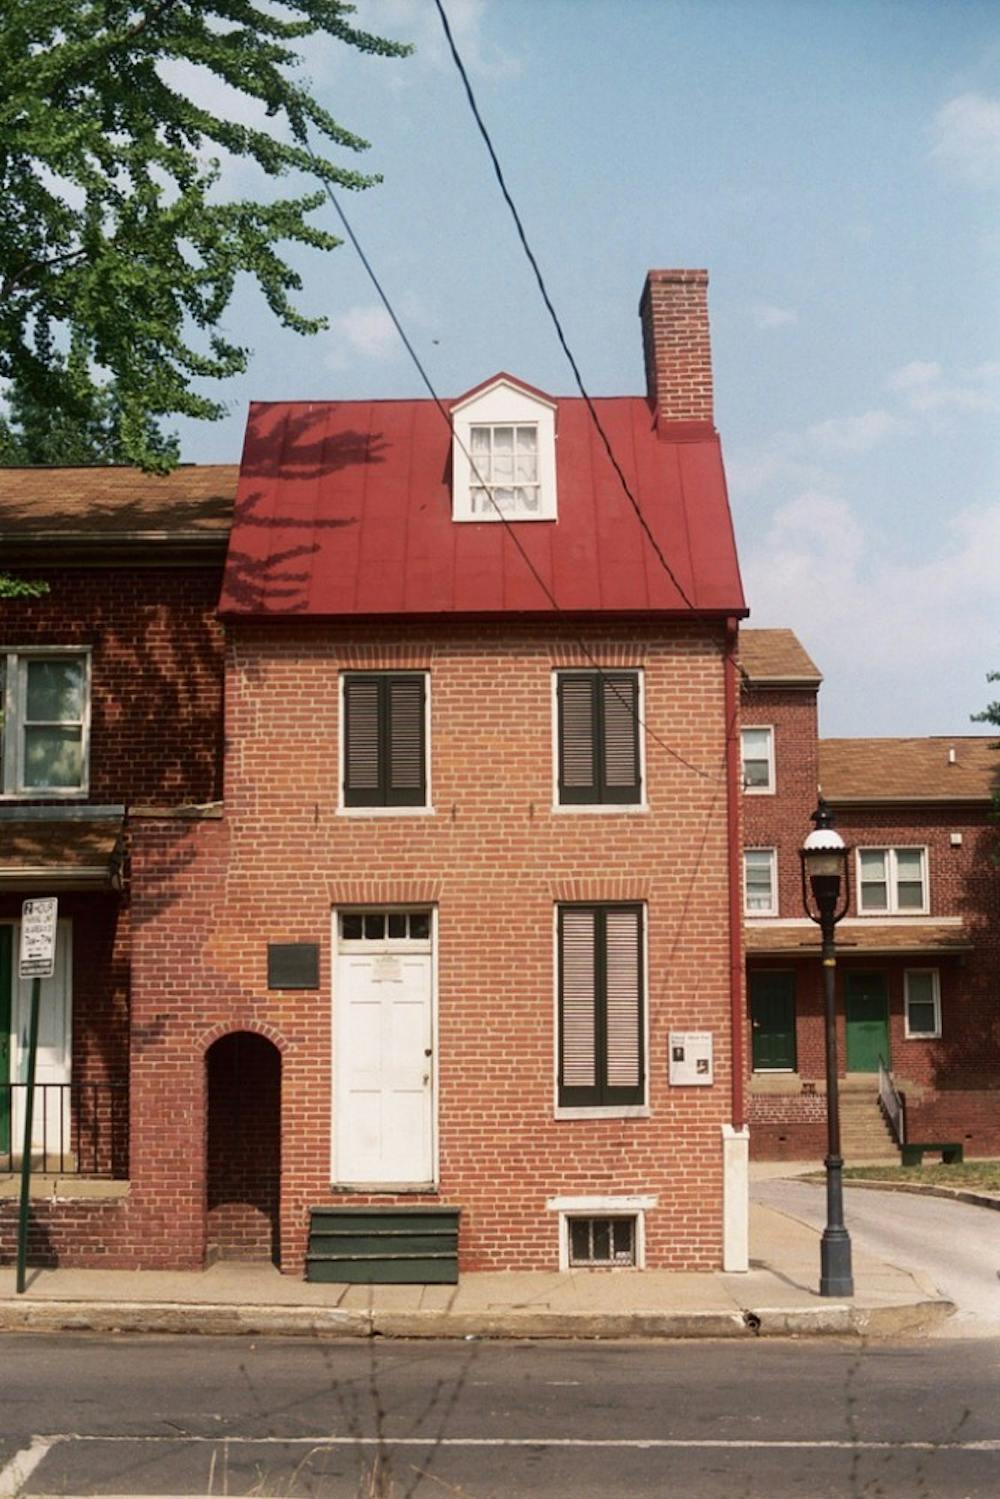 MITCH LECLAIR/CC BY 2.0
The Poe House is tiny and unassuming, but houses a fascinating museum.